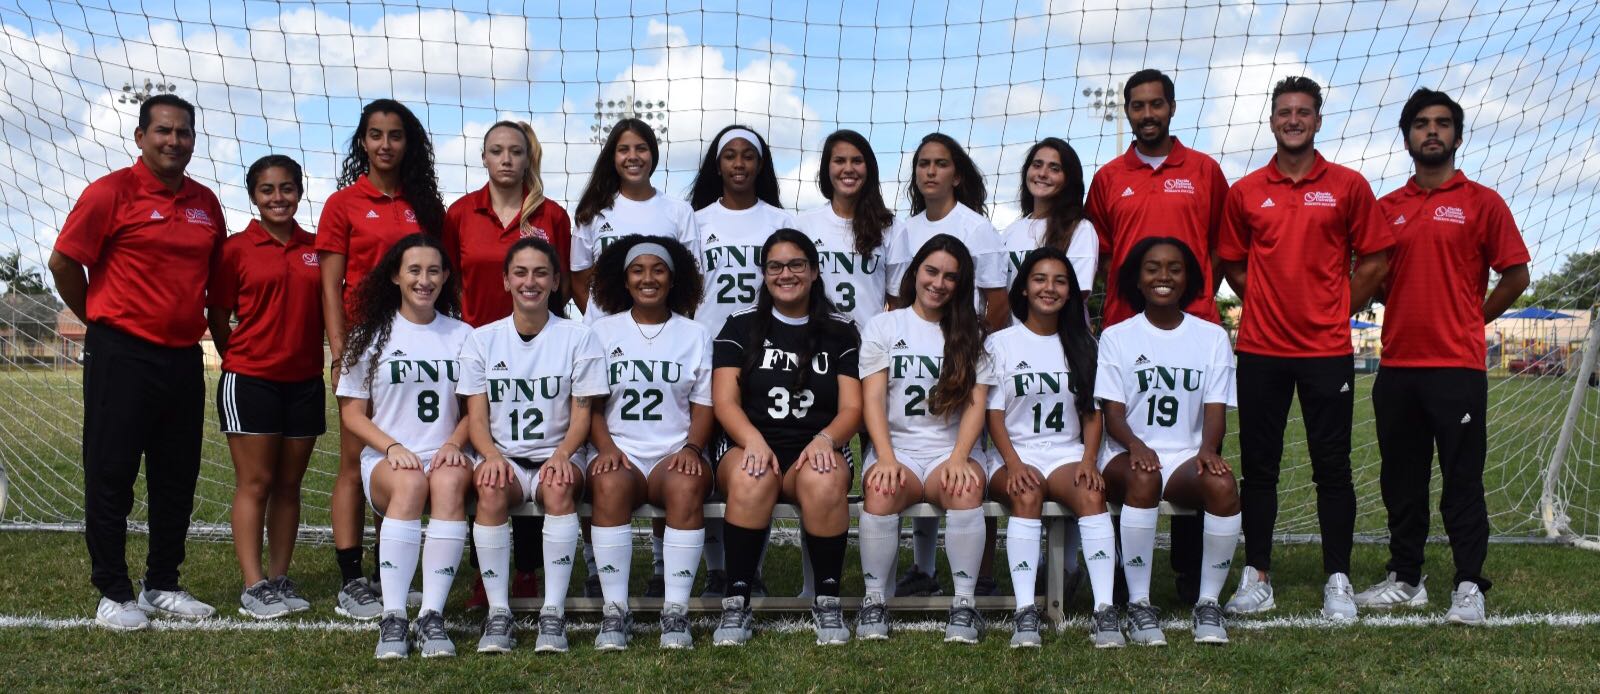 Women's soccer picture